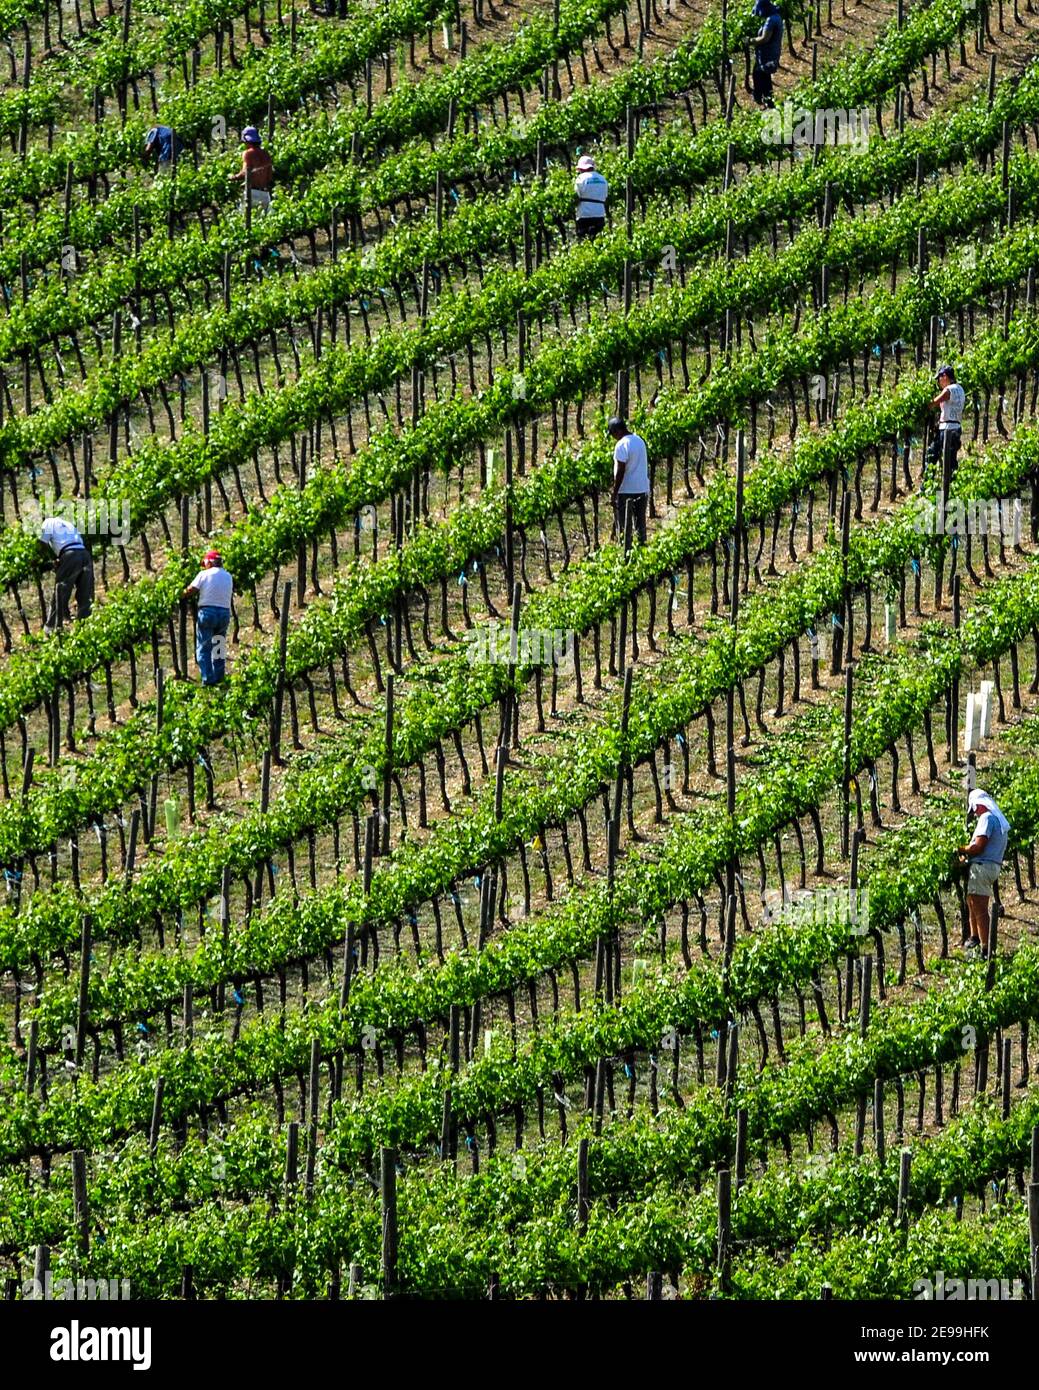 Steep vineyards in the region Marche, Italy Stock Photo